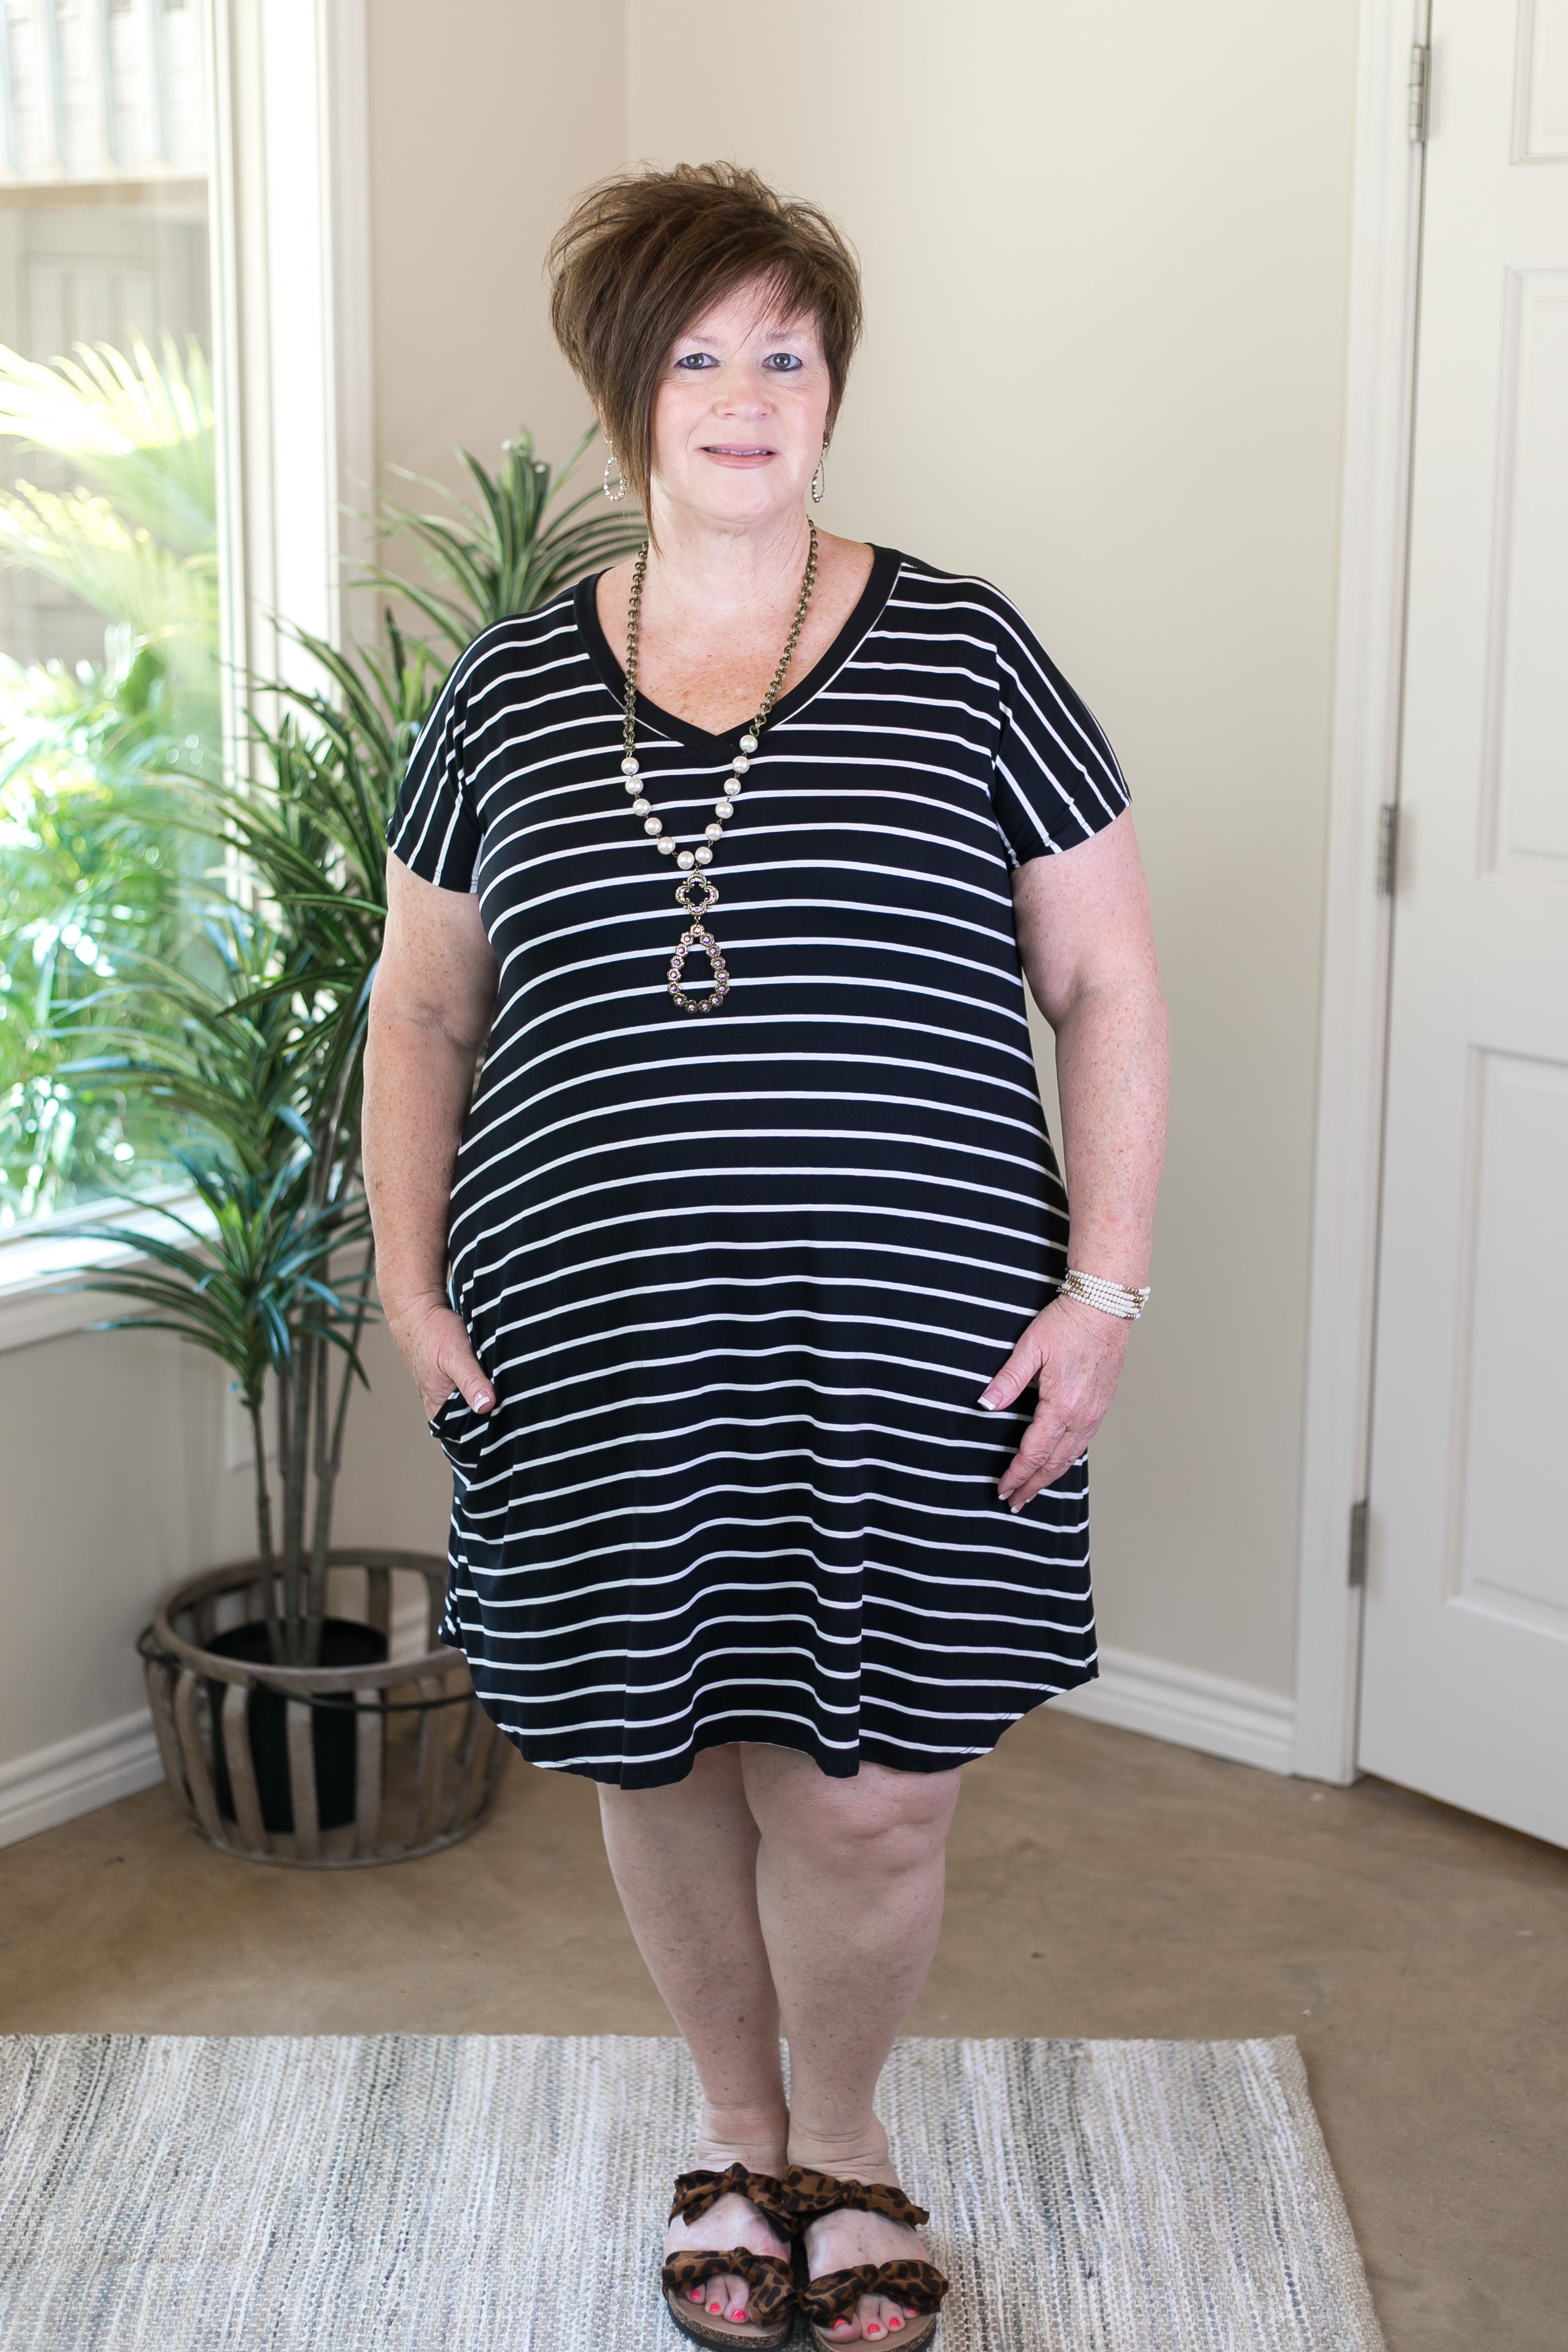 Last Chance Size Small | Beyond Reason Stripe Tee Shirt Dress in Black - Giddy Up Glamour Boutique